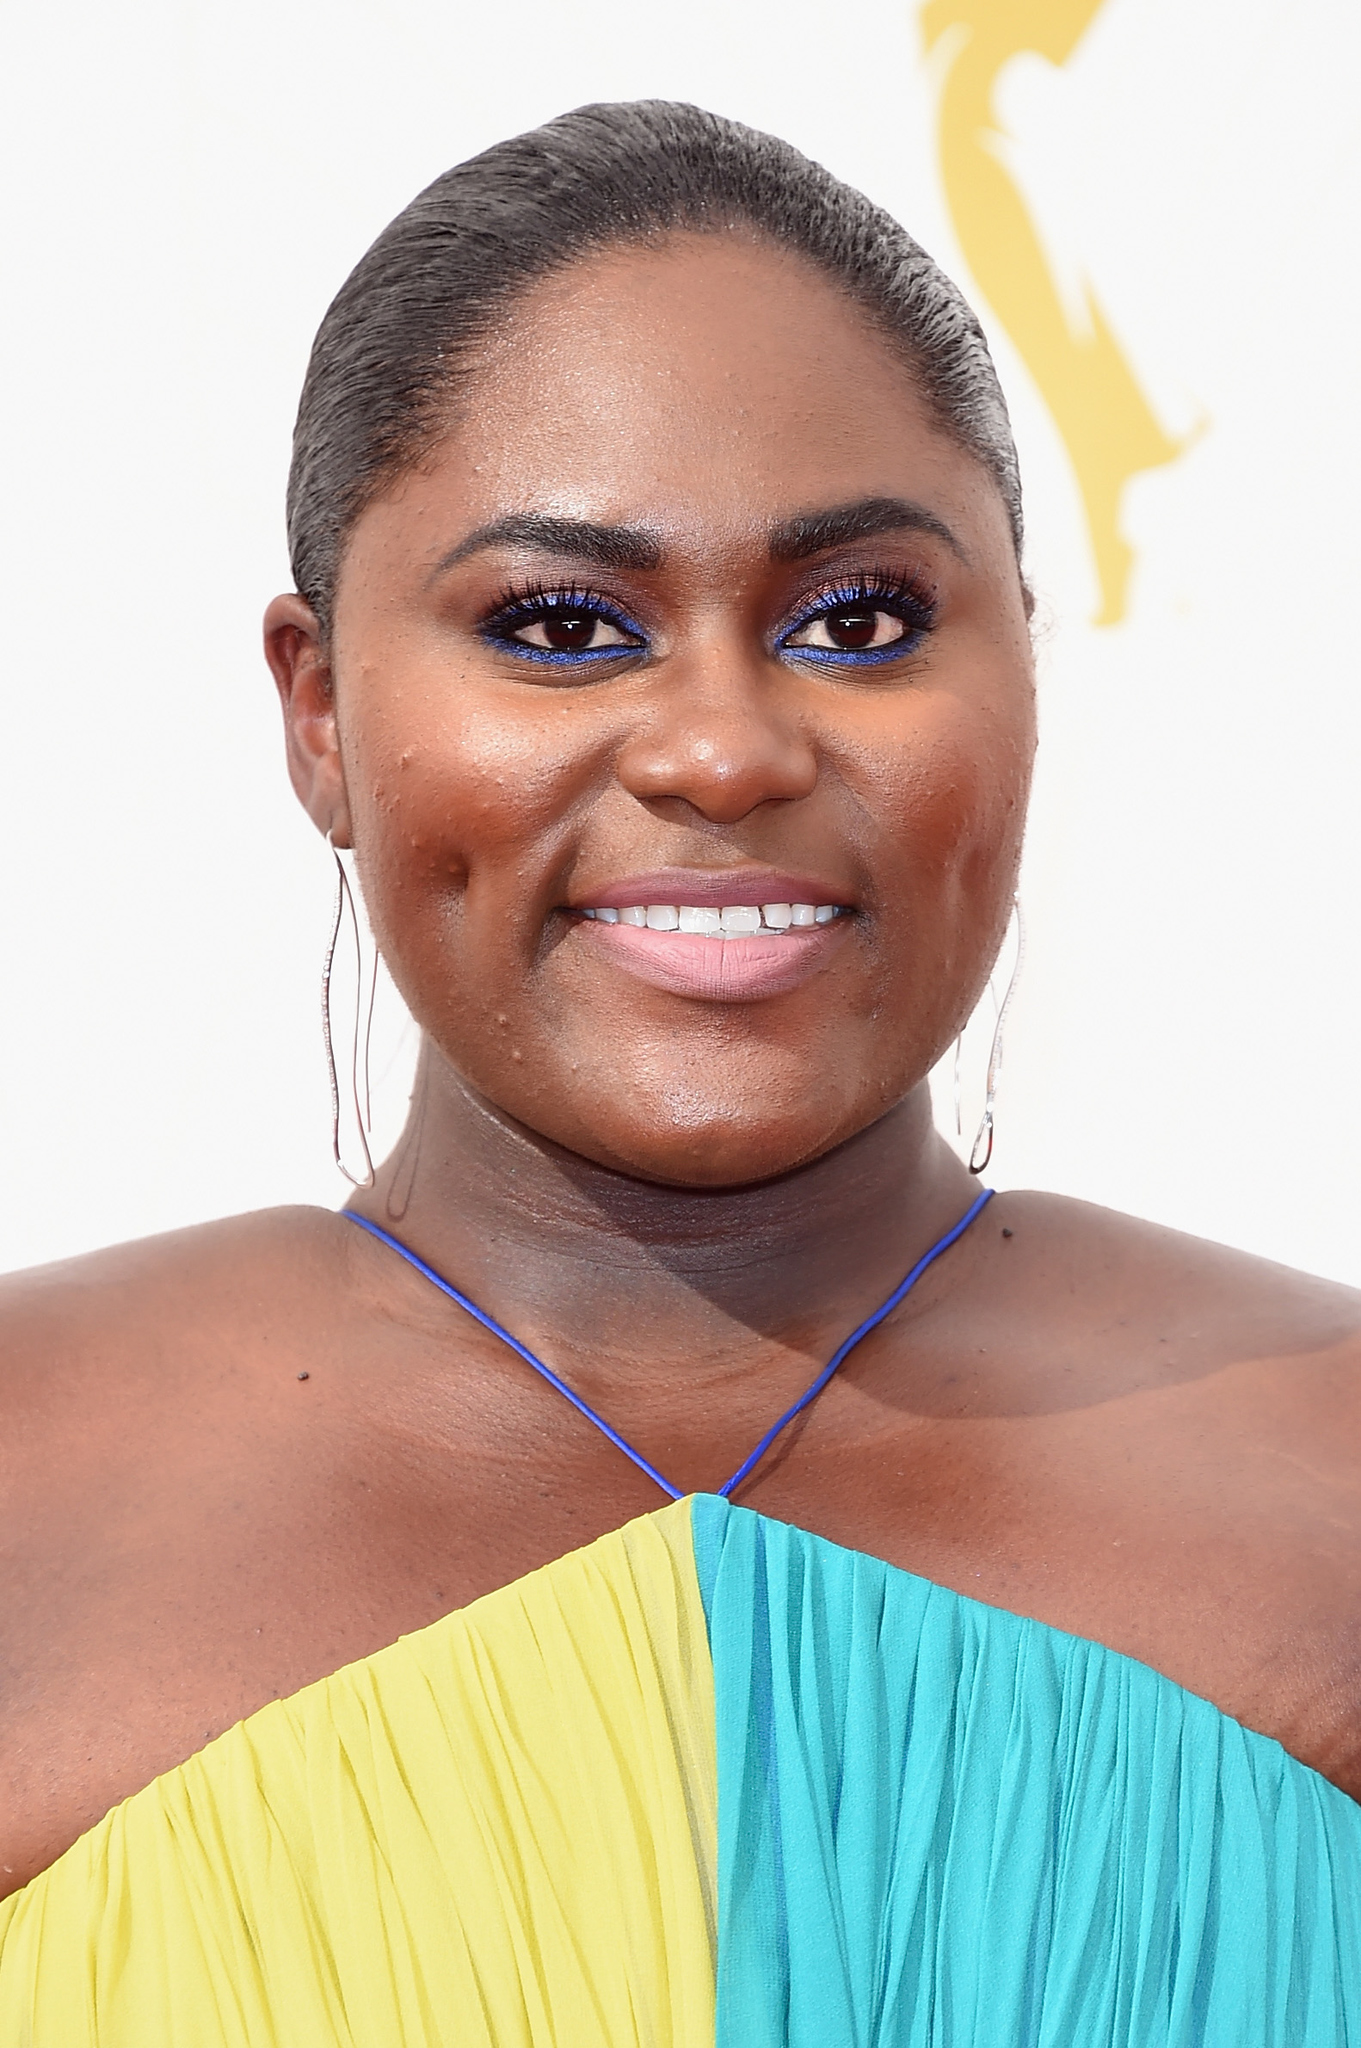 Danielle Brooks at event of The 67th Primetime Emmy Awards (2015)